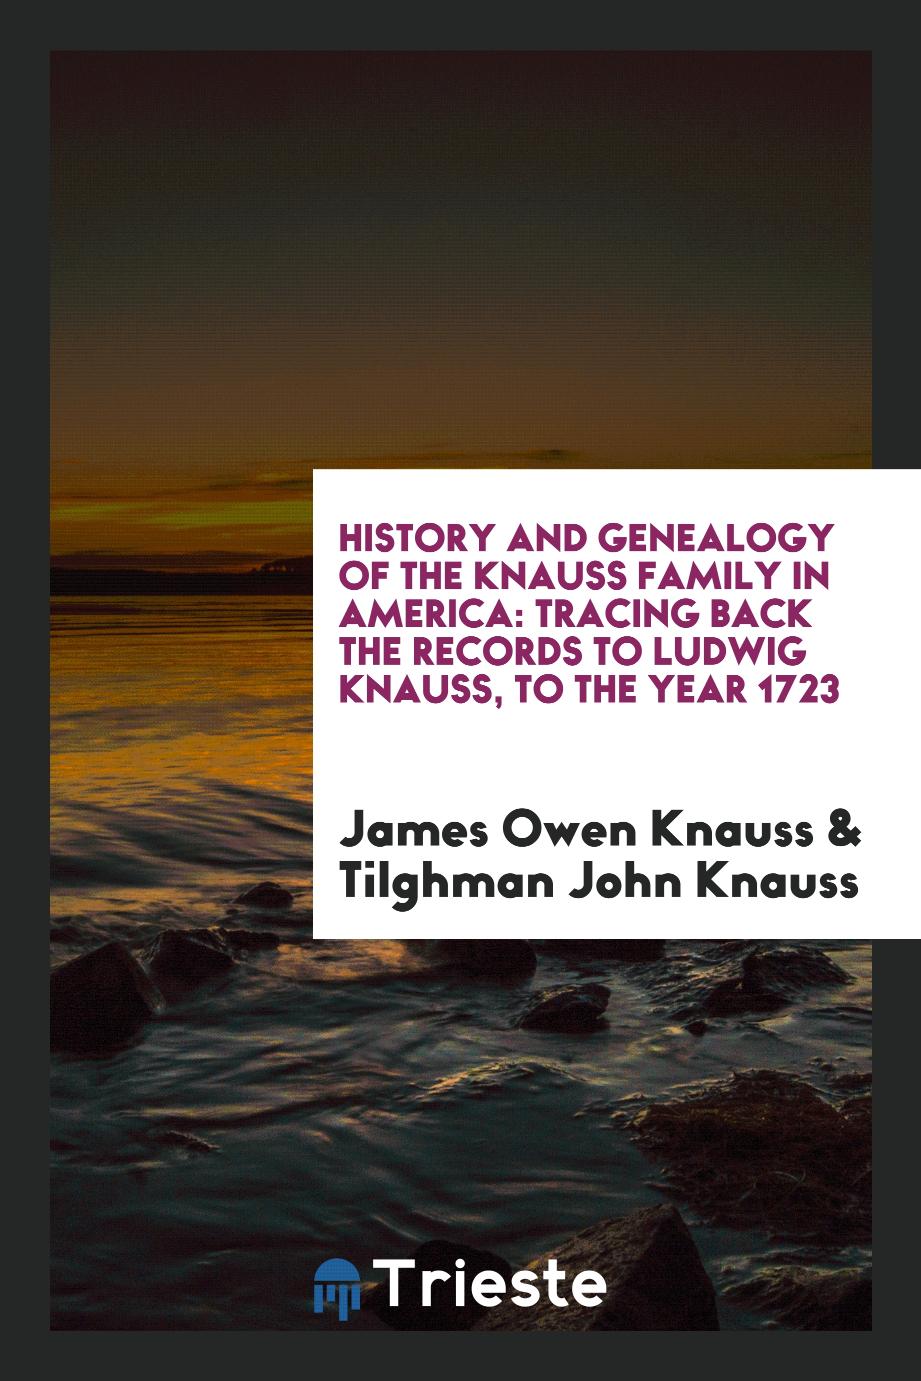 History and Genealogy of the Knauss Family in America: Tracing Back the Records to Ludwig Knauss, to the Year 1723